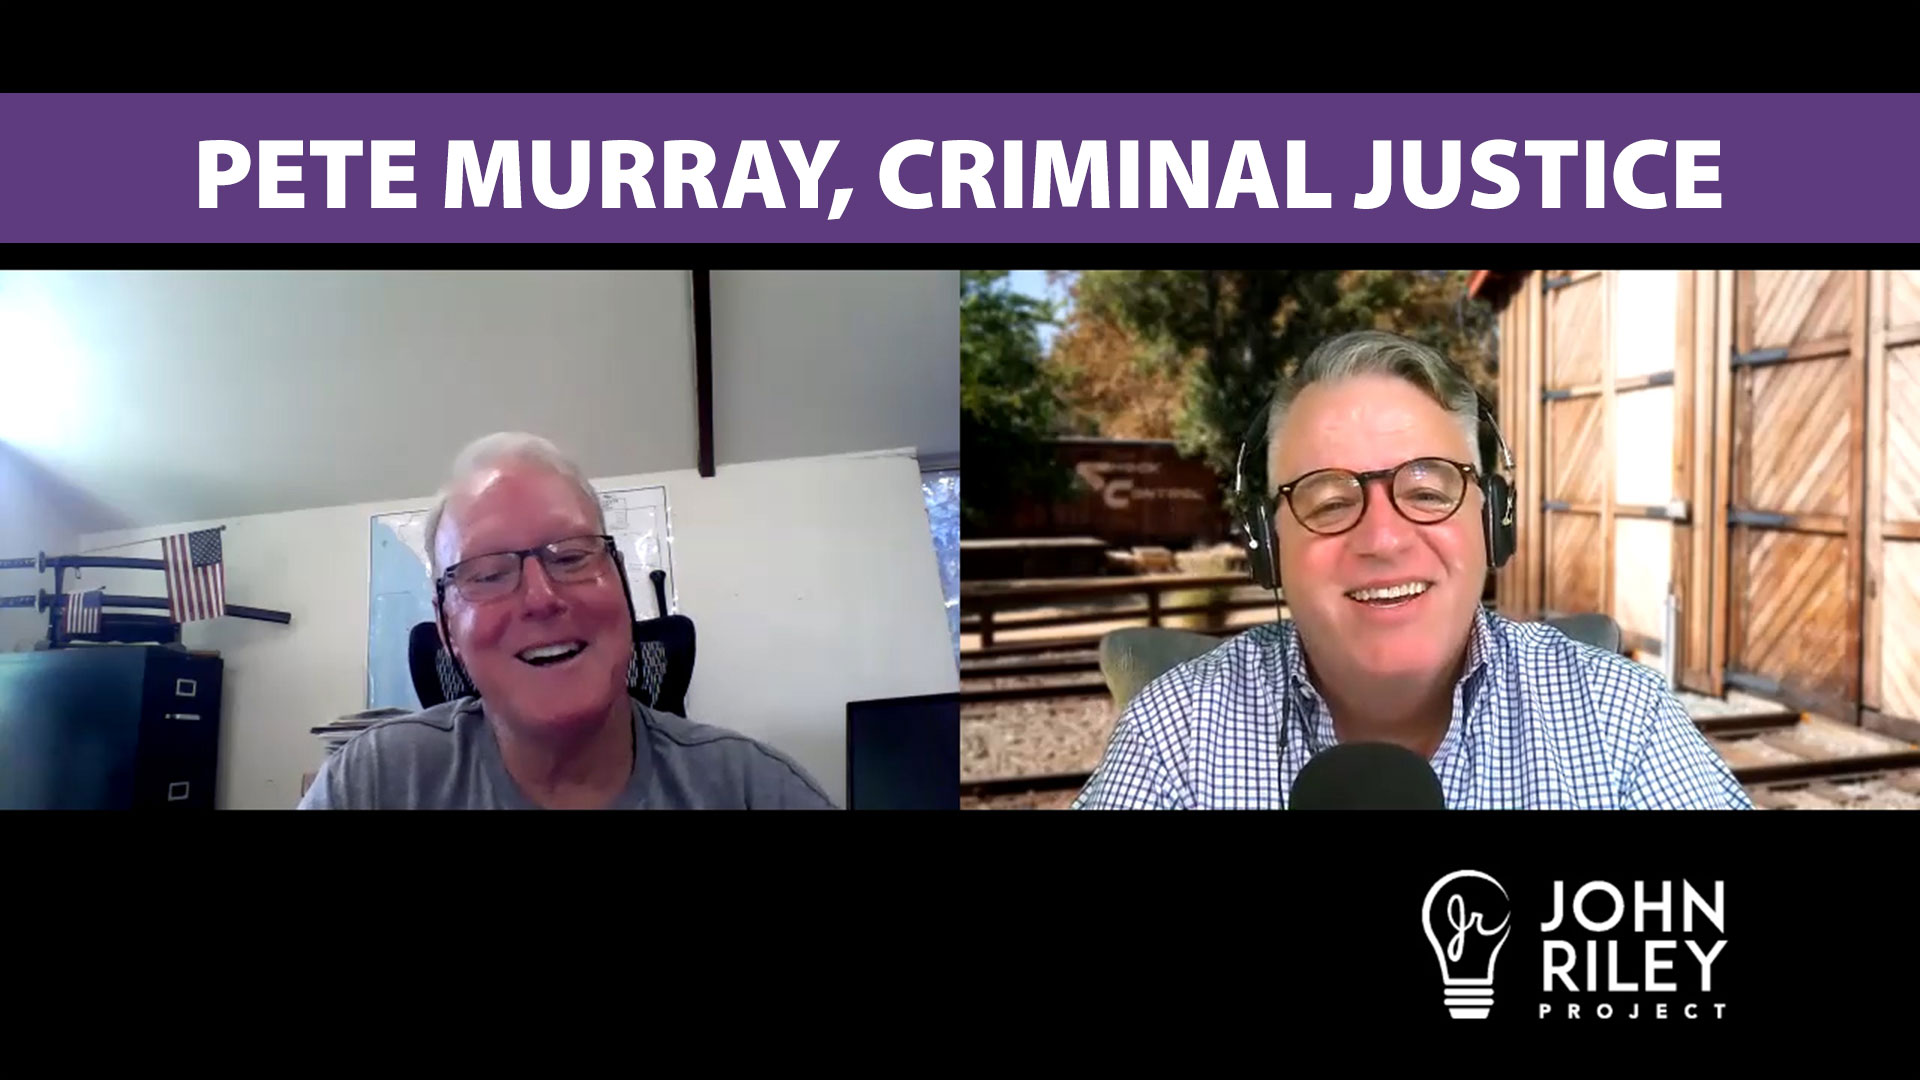 Pete Murray, qualified immunity, law and order maxim, police militarization, War on Drugs, mandatory minimums, no-knock warrants, John Riley Project, JRP0139